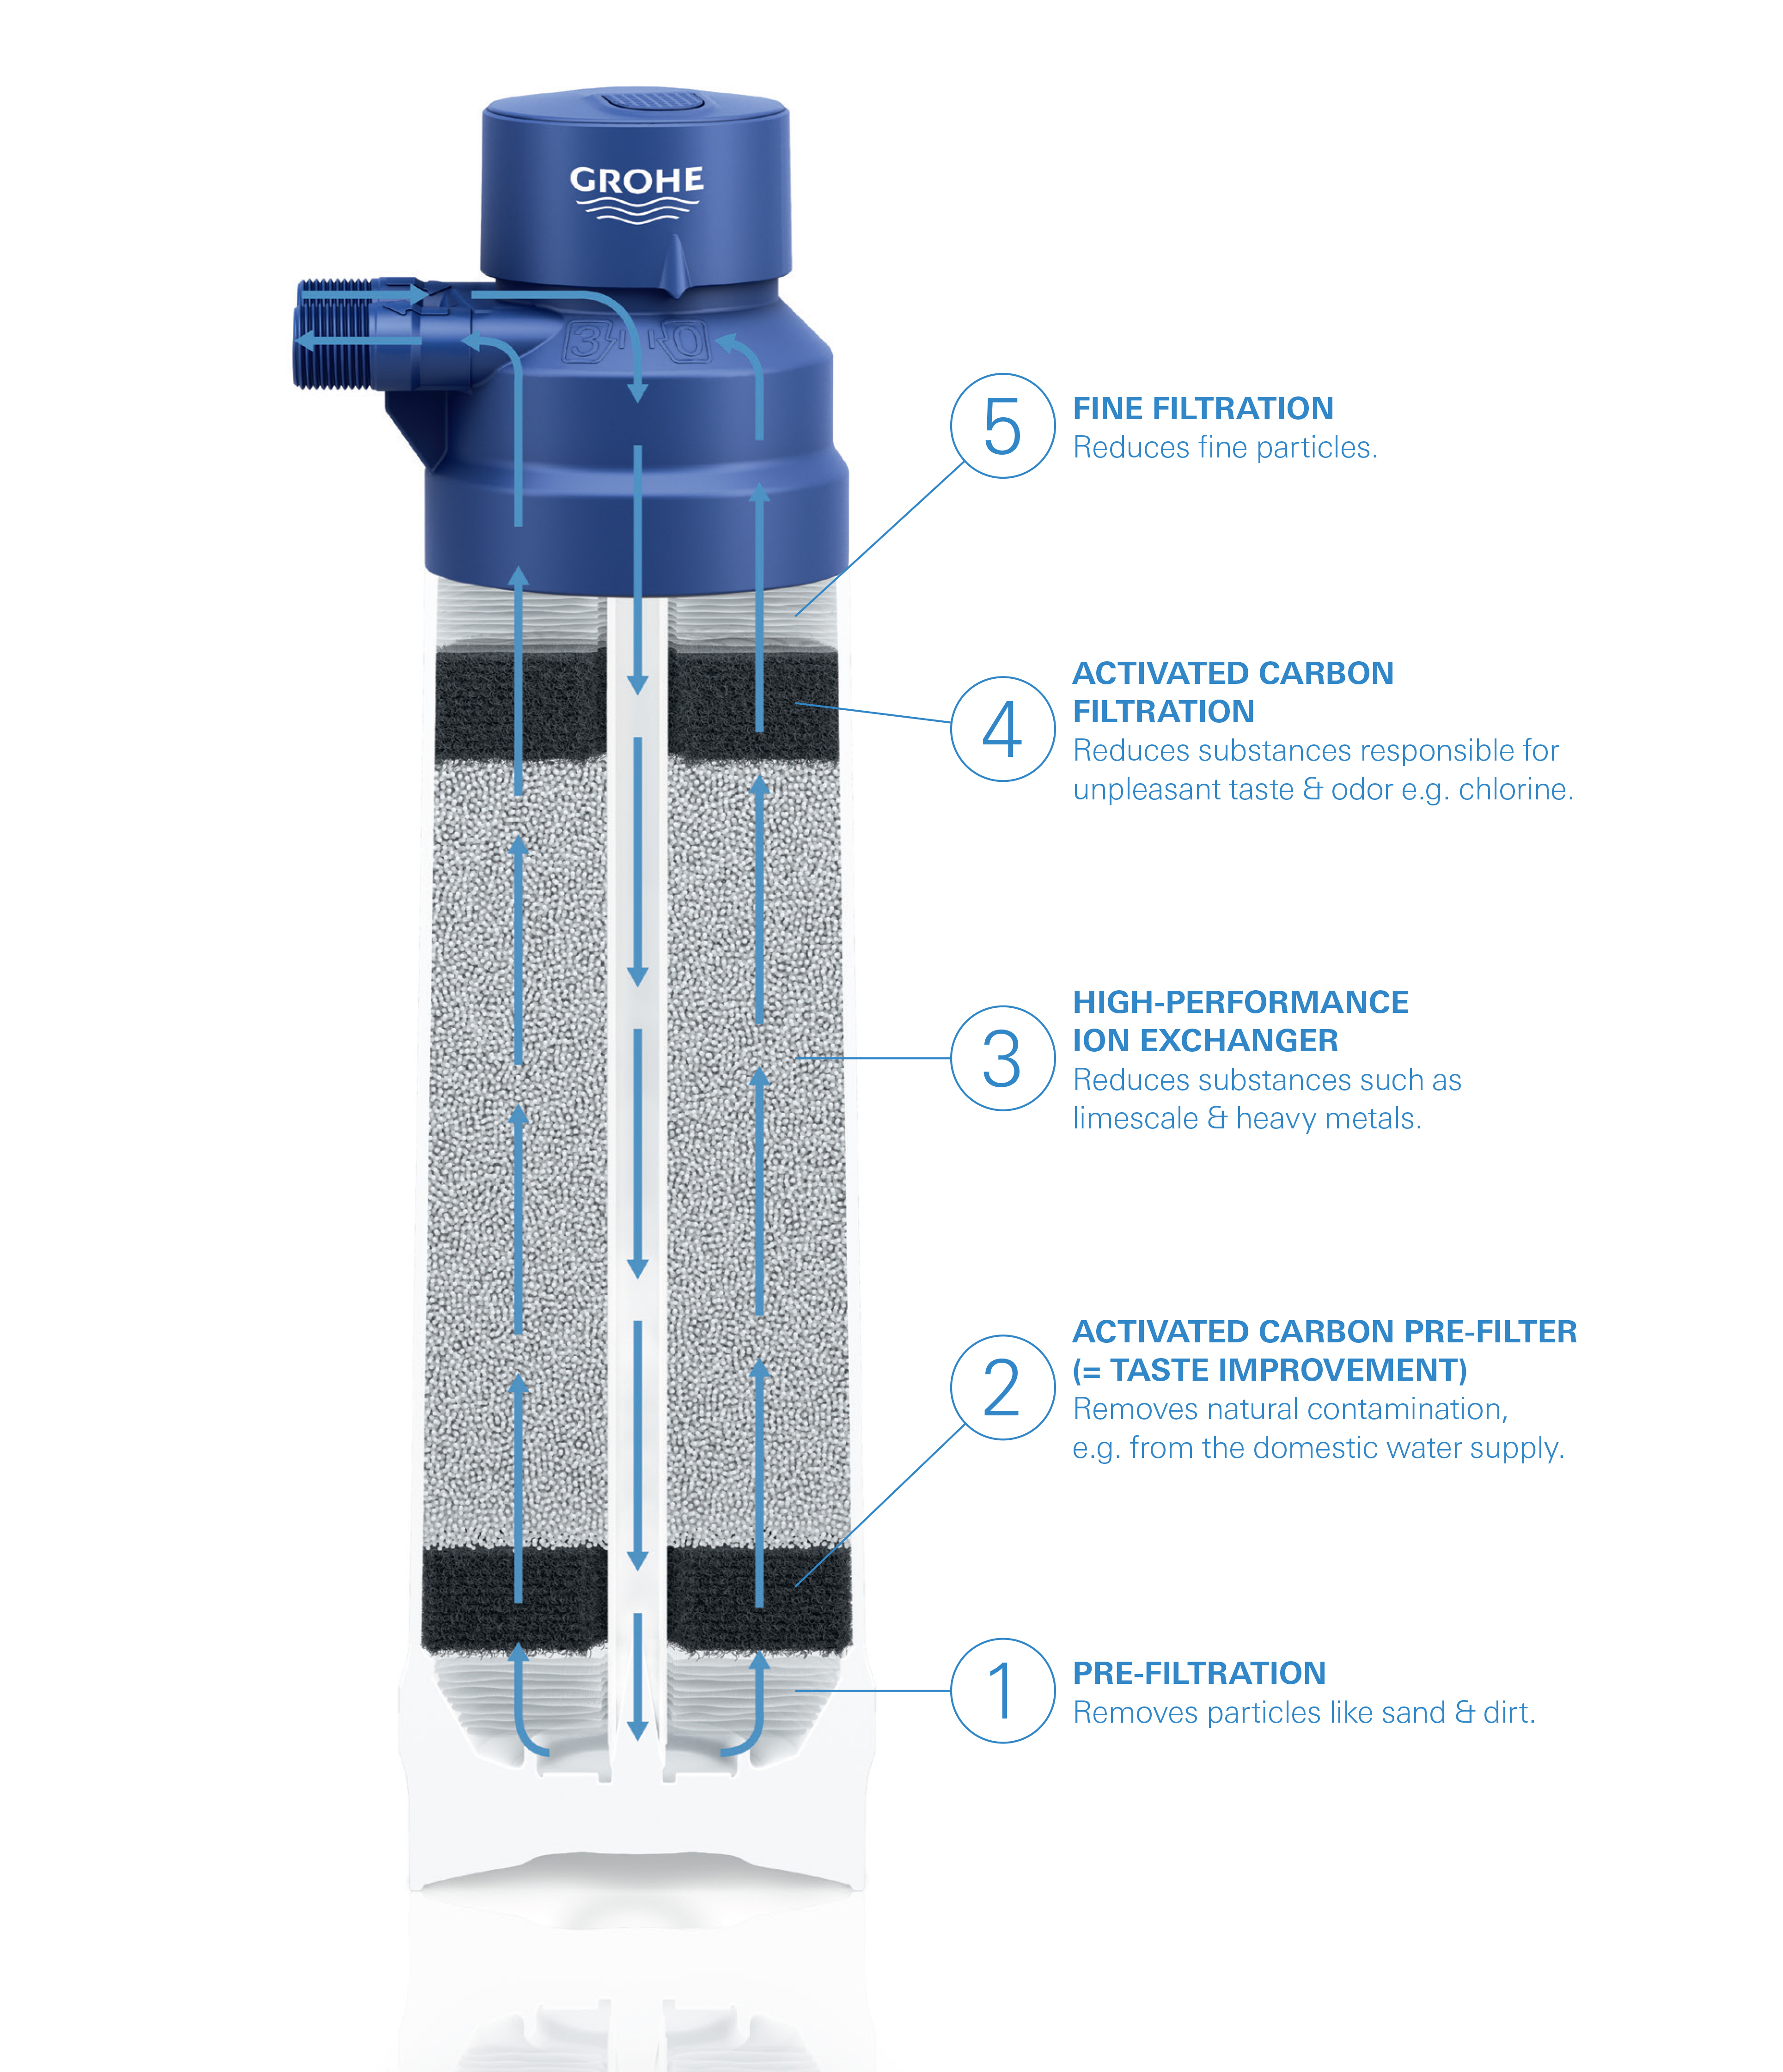 GROHE Blue Carbon Filter, L-Size